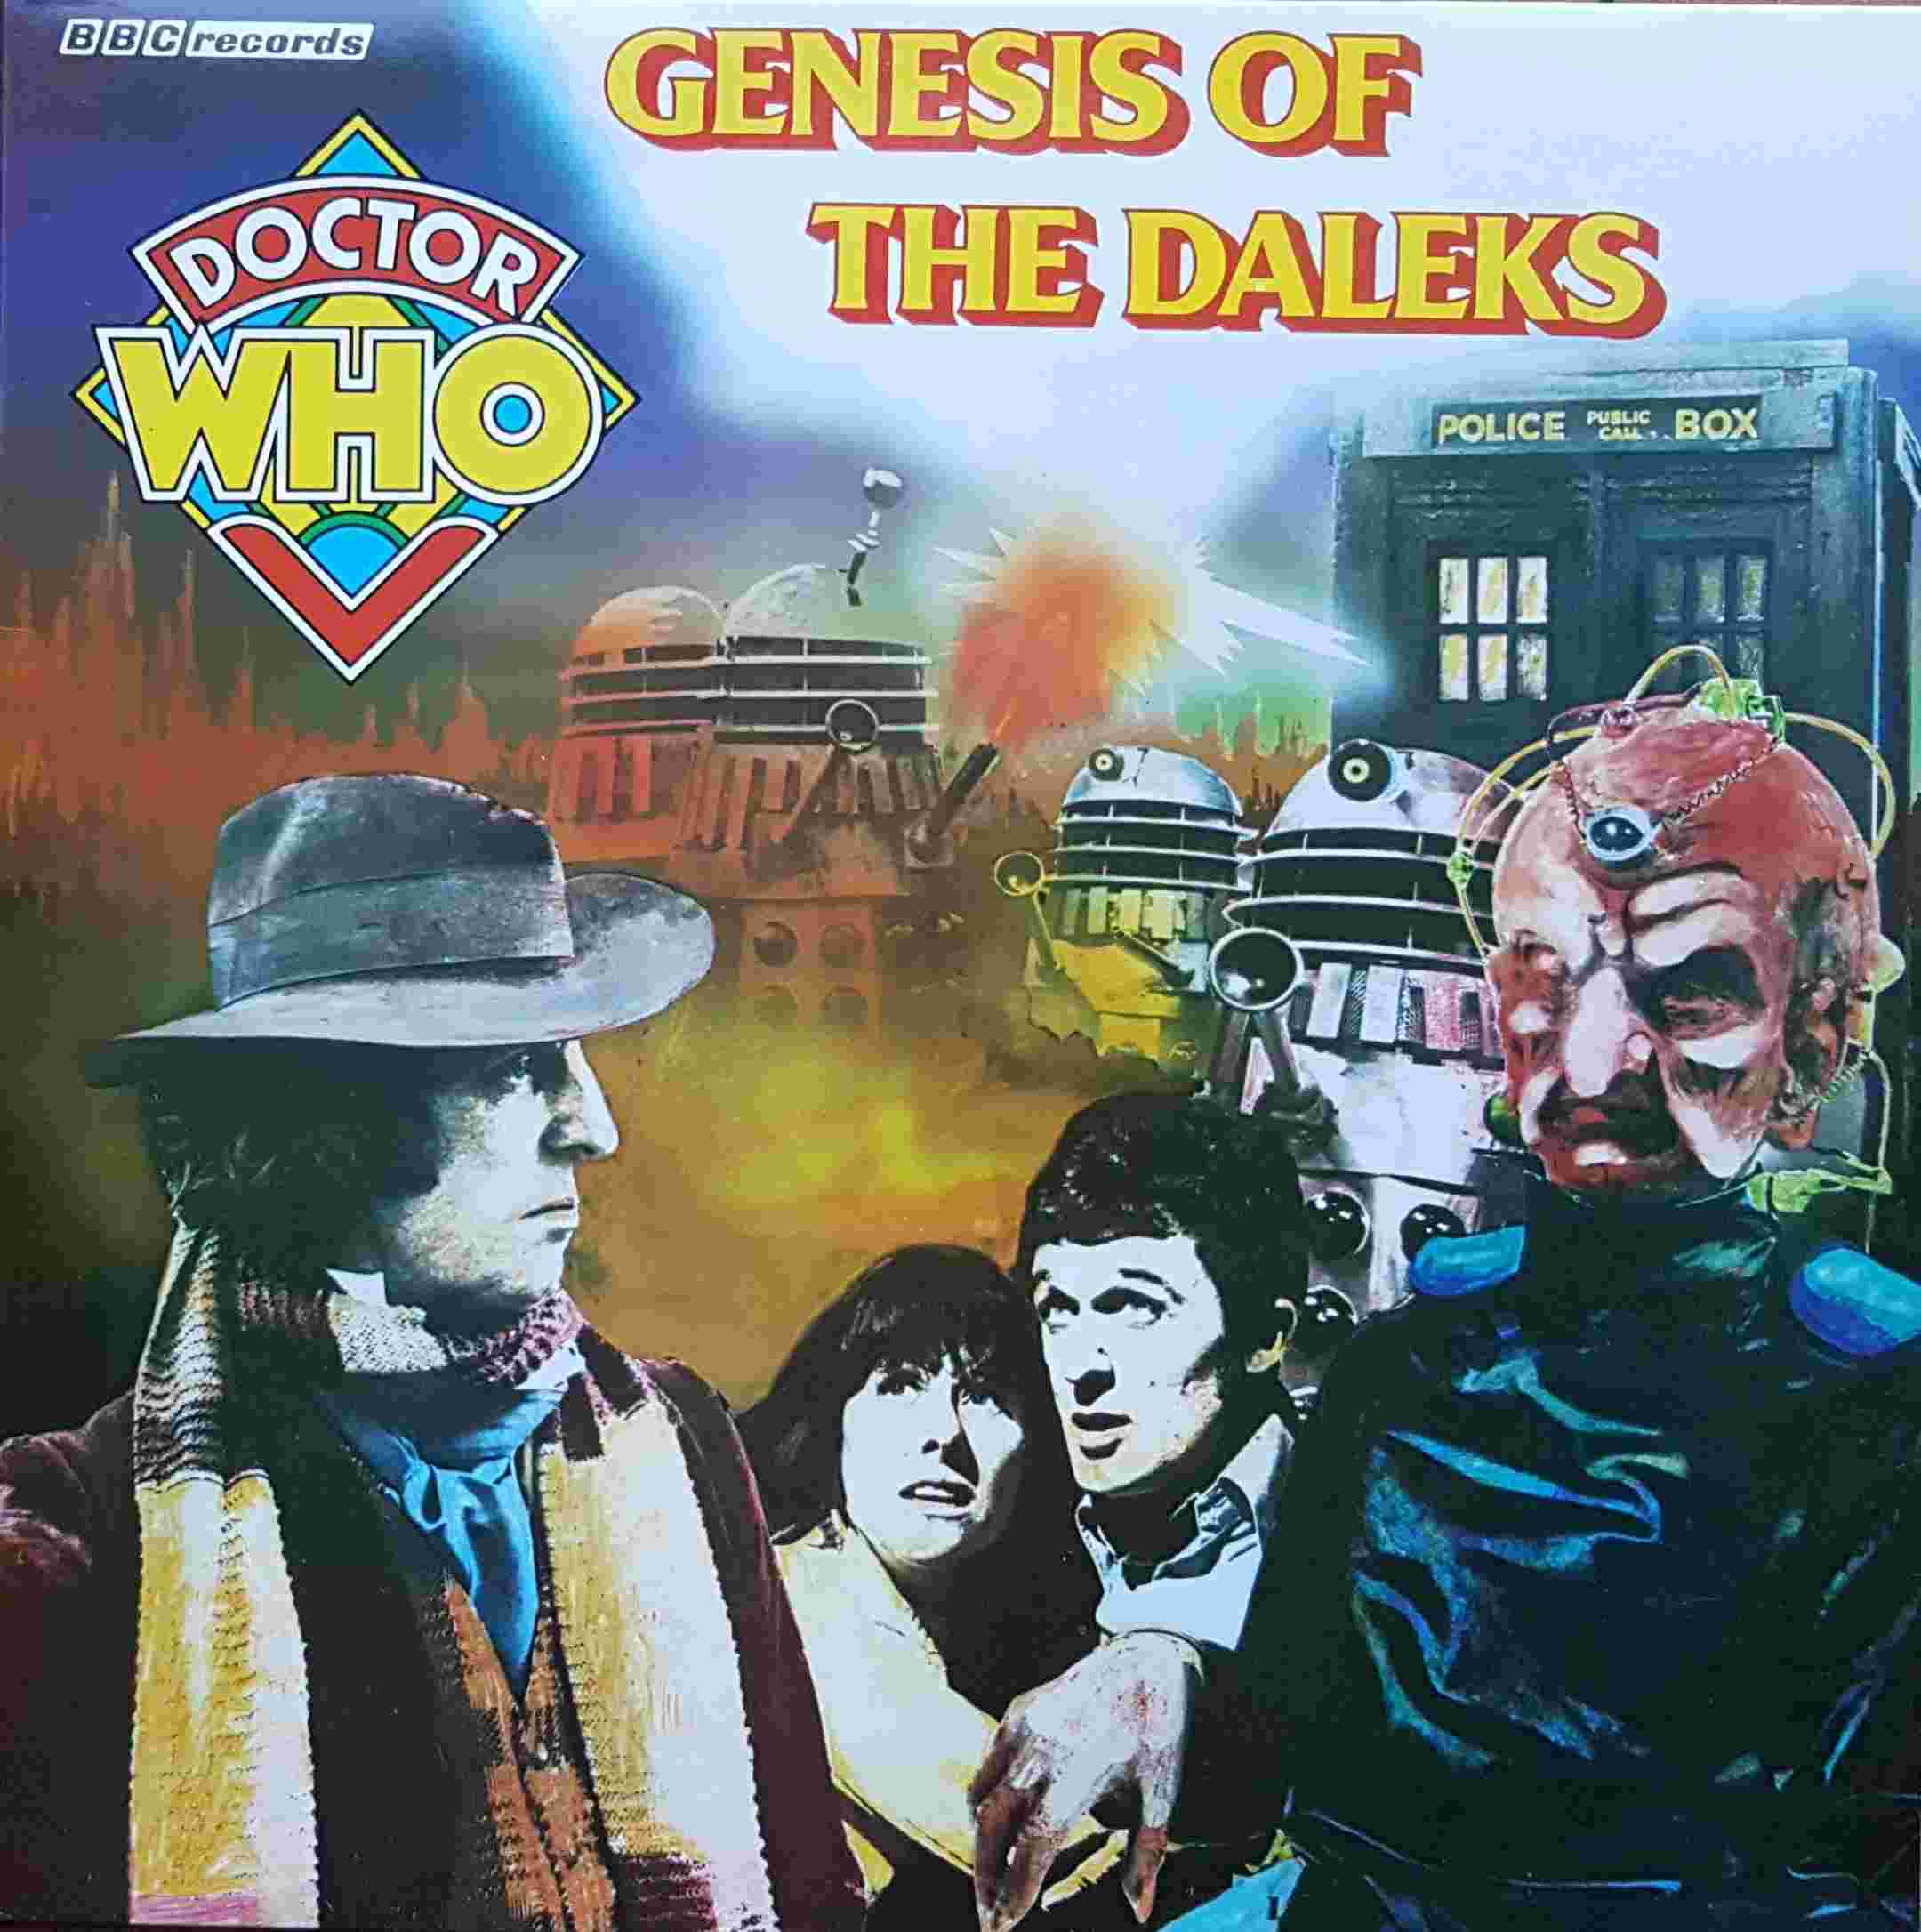 Picture of REH 364 Doctor Who - Genesis of the Daleks by artist Terry Nation from the BBC albums - Records and Tapes library